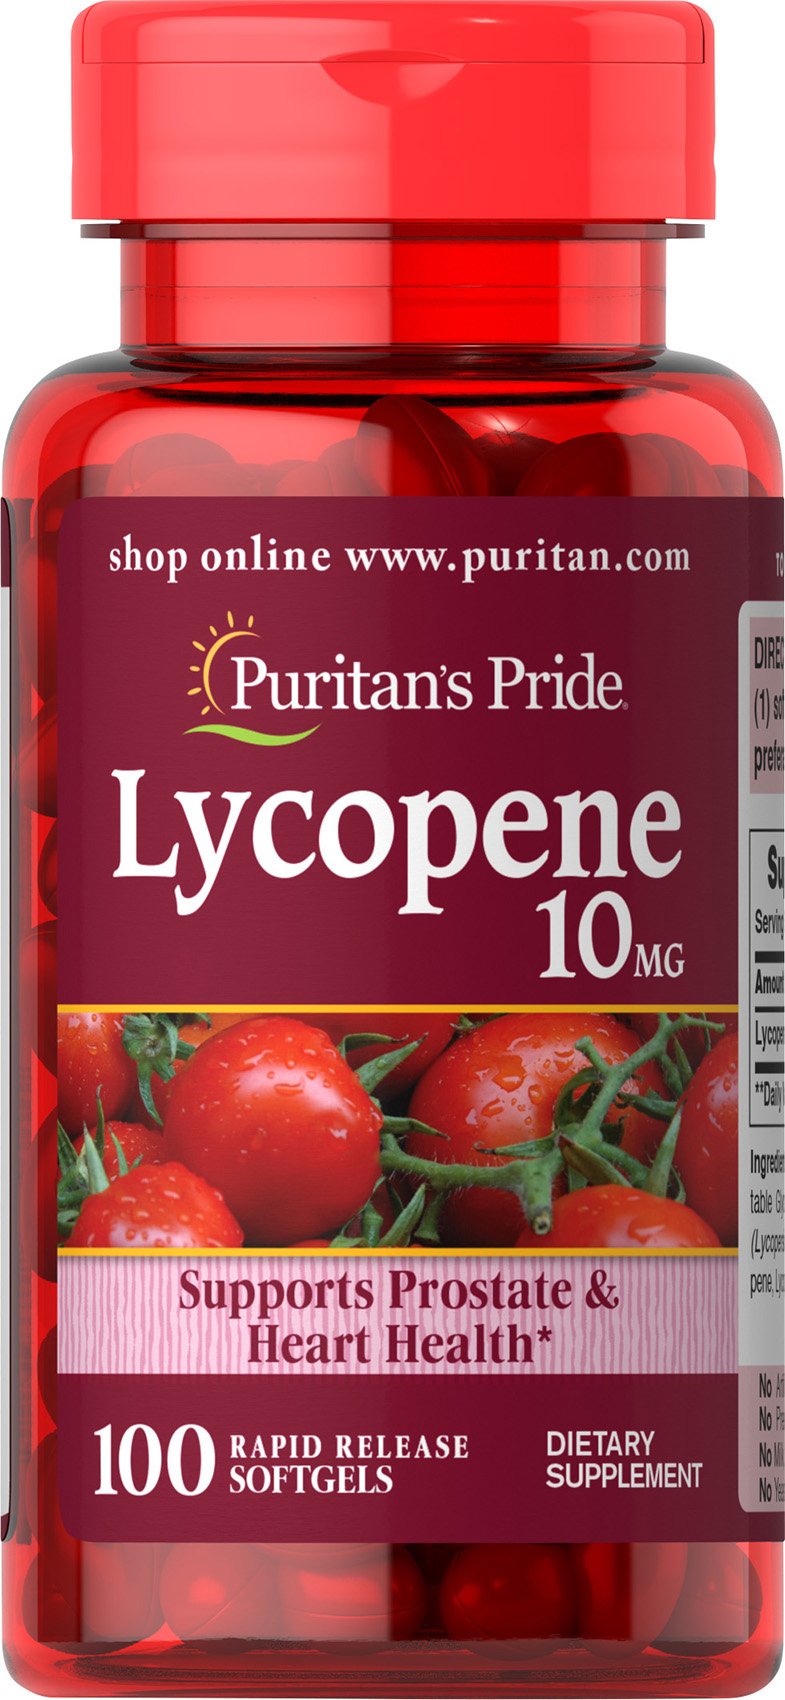 100-Count Puritan's Pride Lycopene Supplements (10mg) $6.50 + Free Shipping w/ Prime